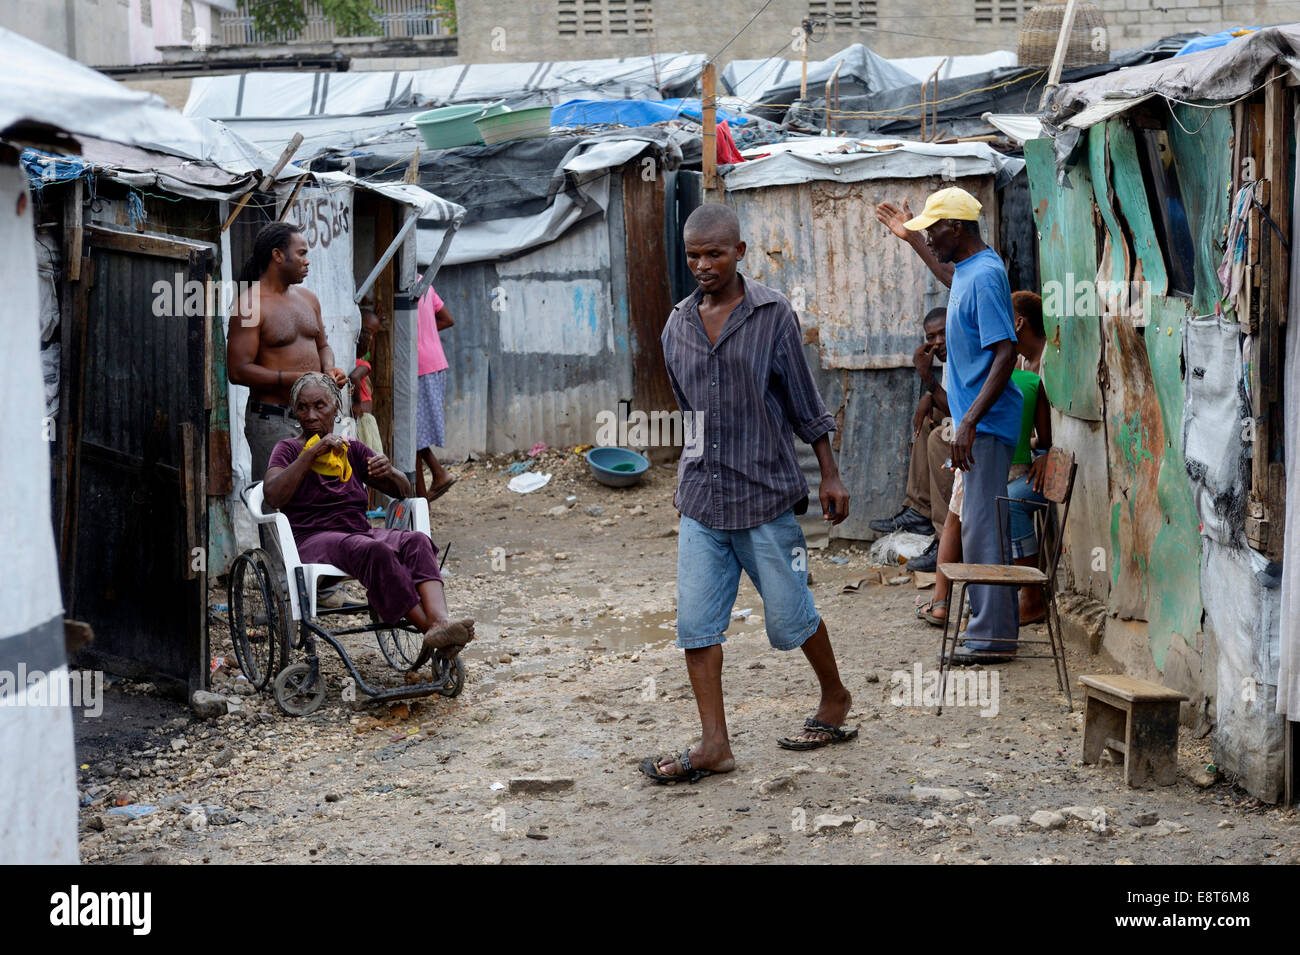 People and a sick woman in a wheelchair, Camp Icare, camp for earthquake refugees, Fort National, Port-au-Prince, Haiti Stock Photo